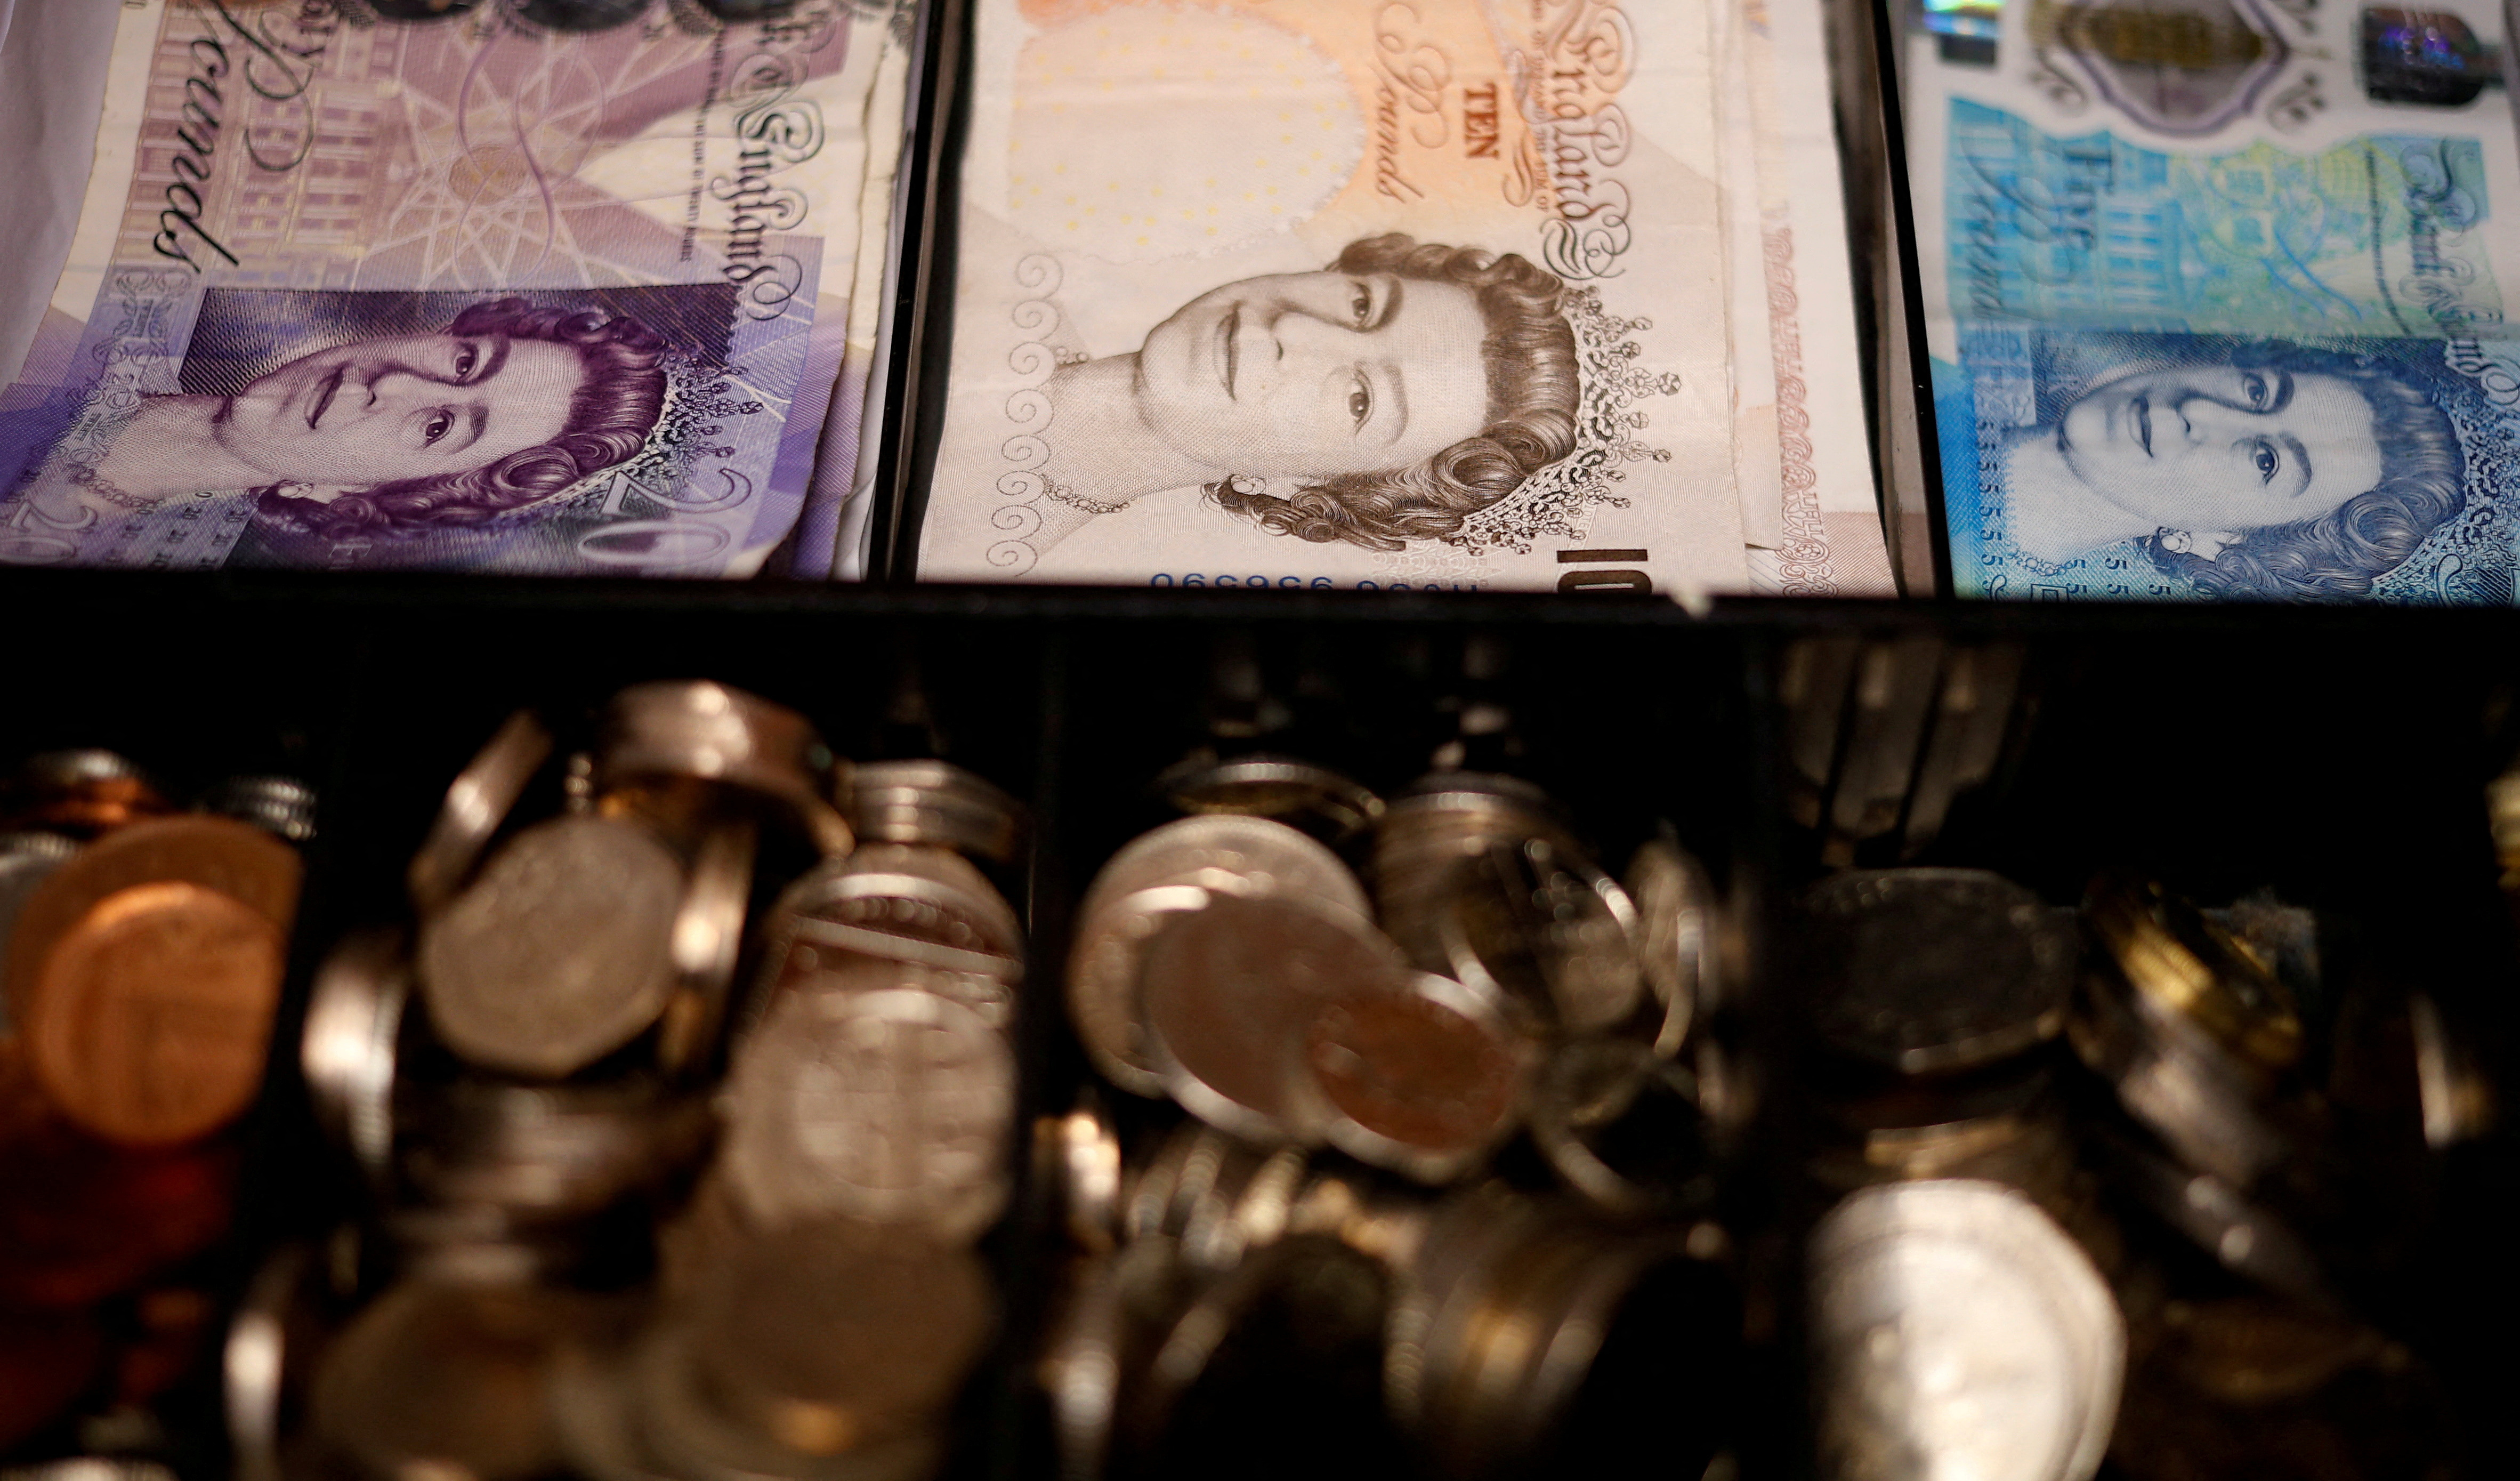 Pound notes and coins are seen inside a cash register in a bar in Manchester, Britain